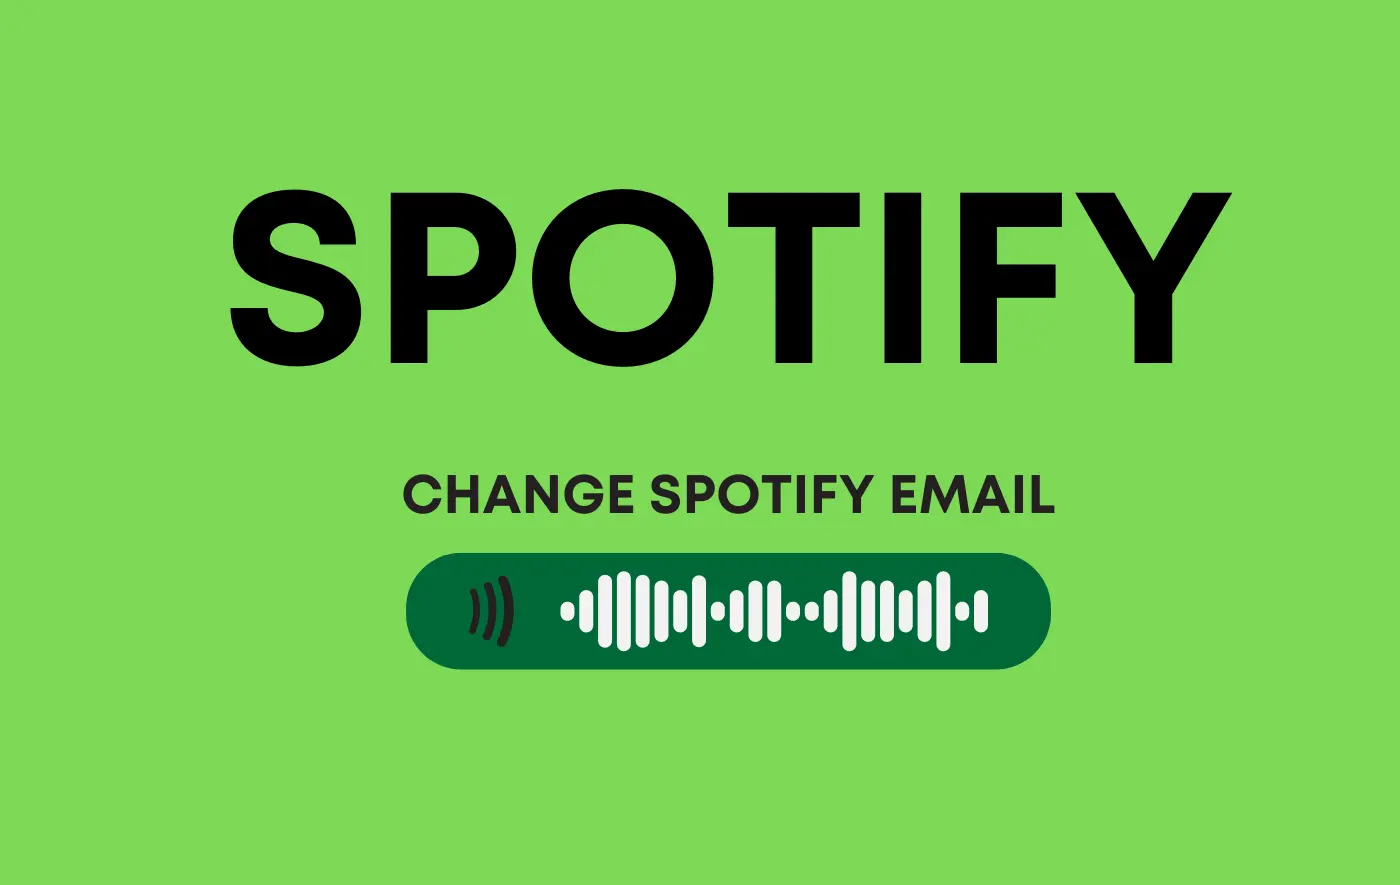 Change Spotify Email how?